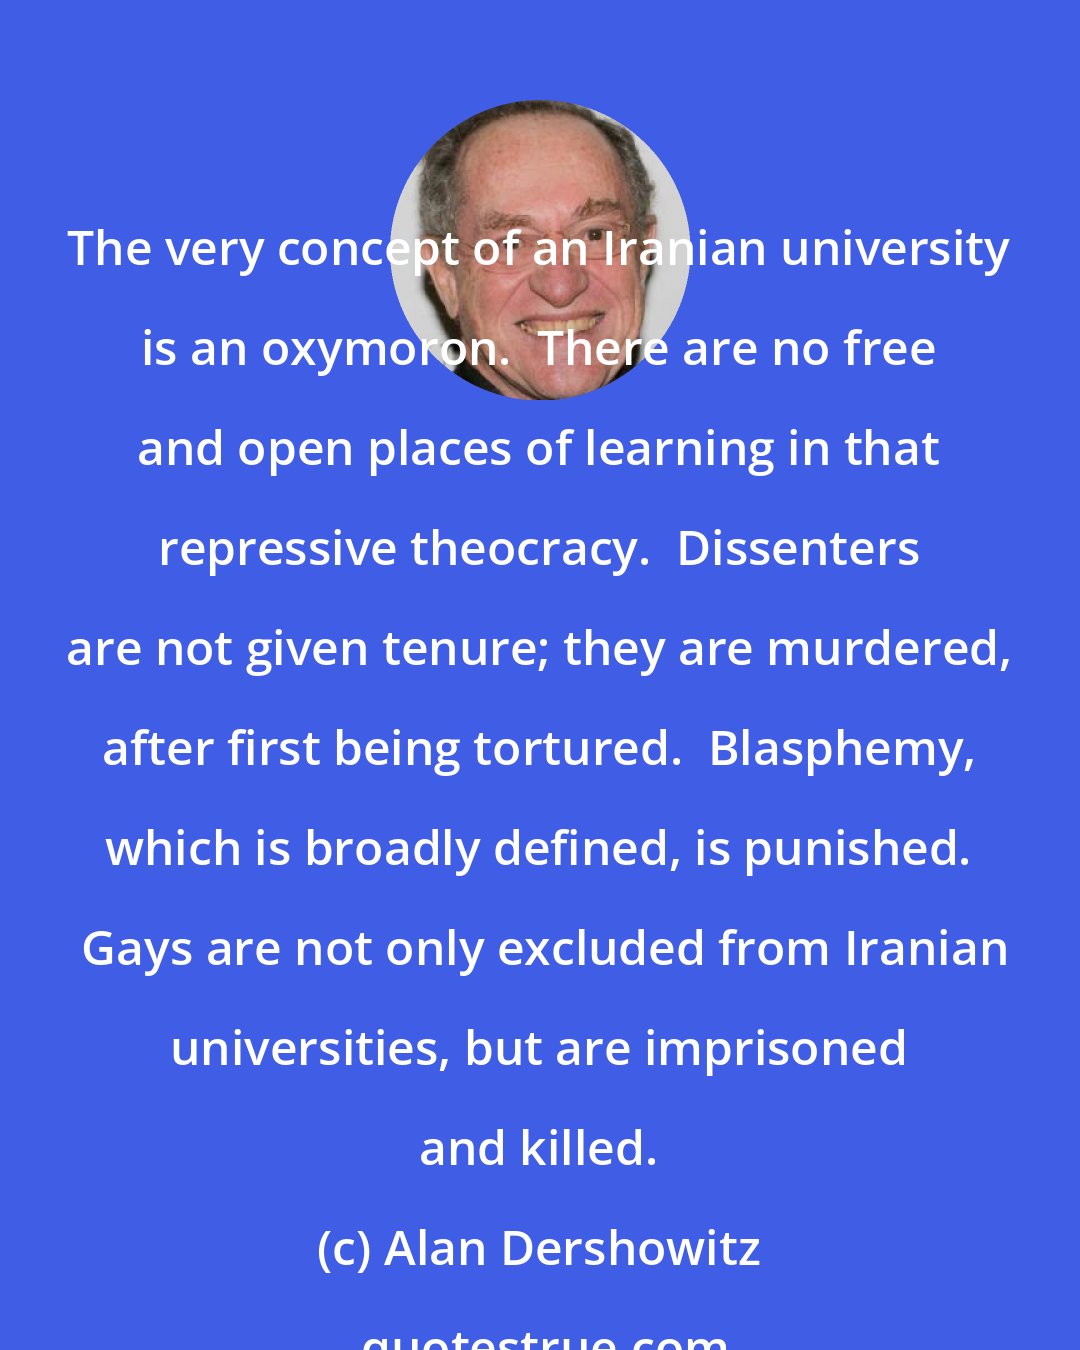 Alan Dershowitz: The very concept of an Iranian university is an oxymoron.  There are no free and open places of learning in that repressive theocracy.  Dissenters are not given tenure; they are murdered, after first being tortured.  Blasphemy, which is broadly defined, is punished.  Gays are not only excluded from Iranian universities, but are imprisoned and killed.